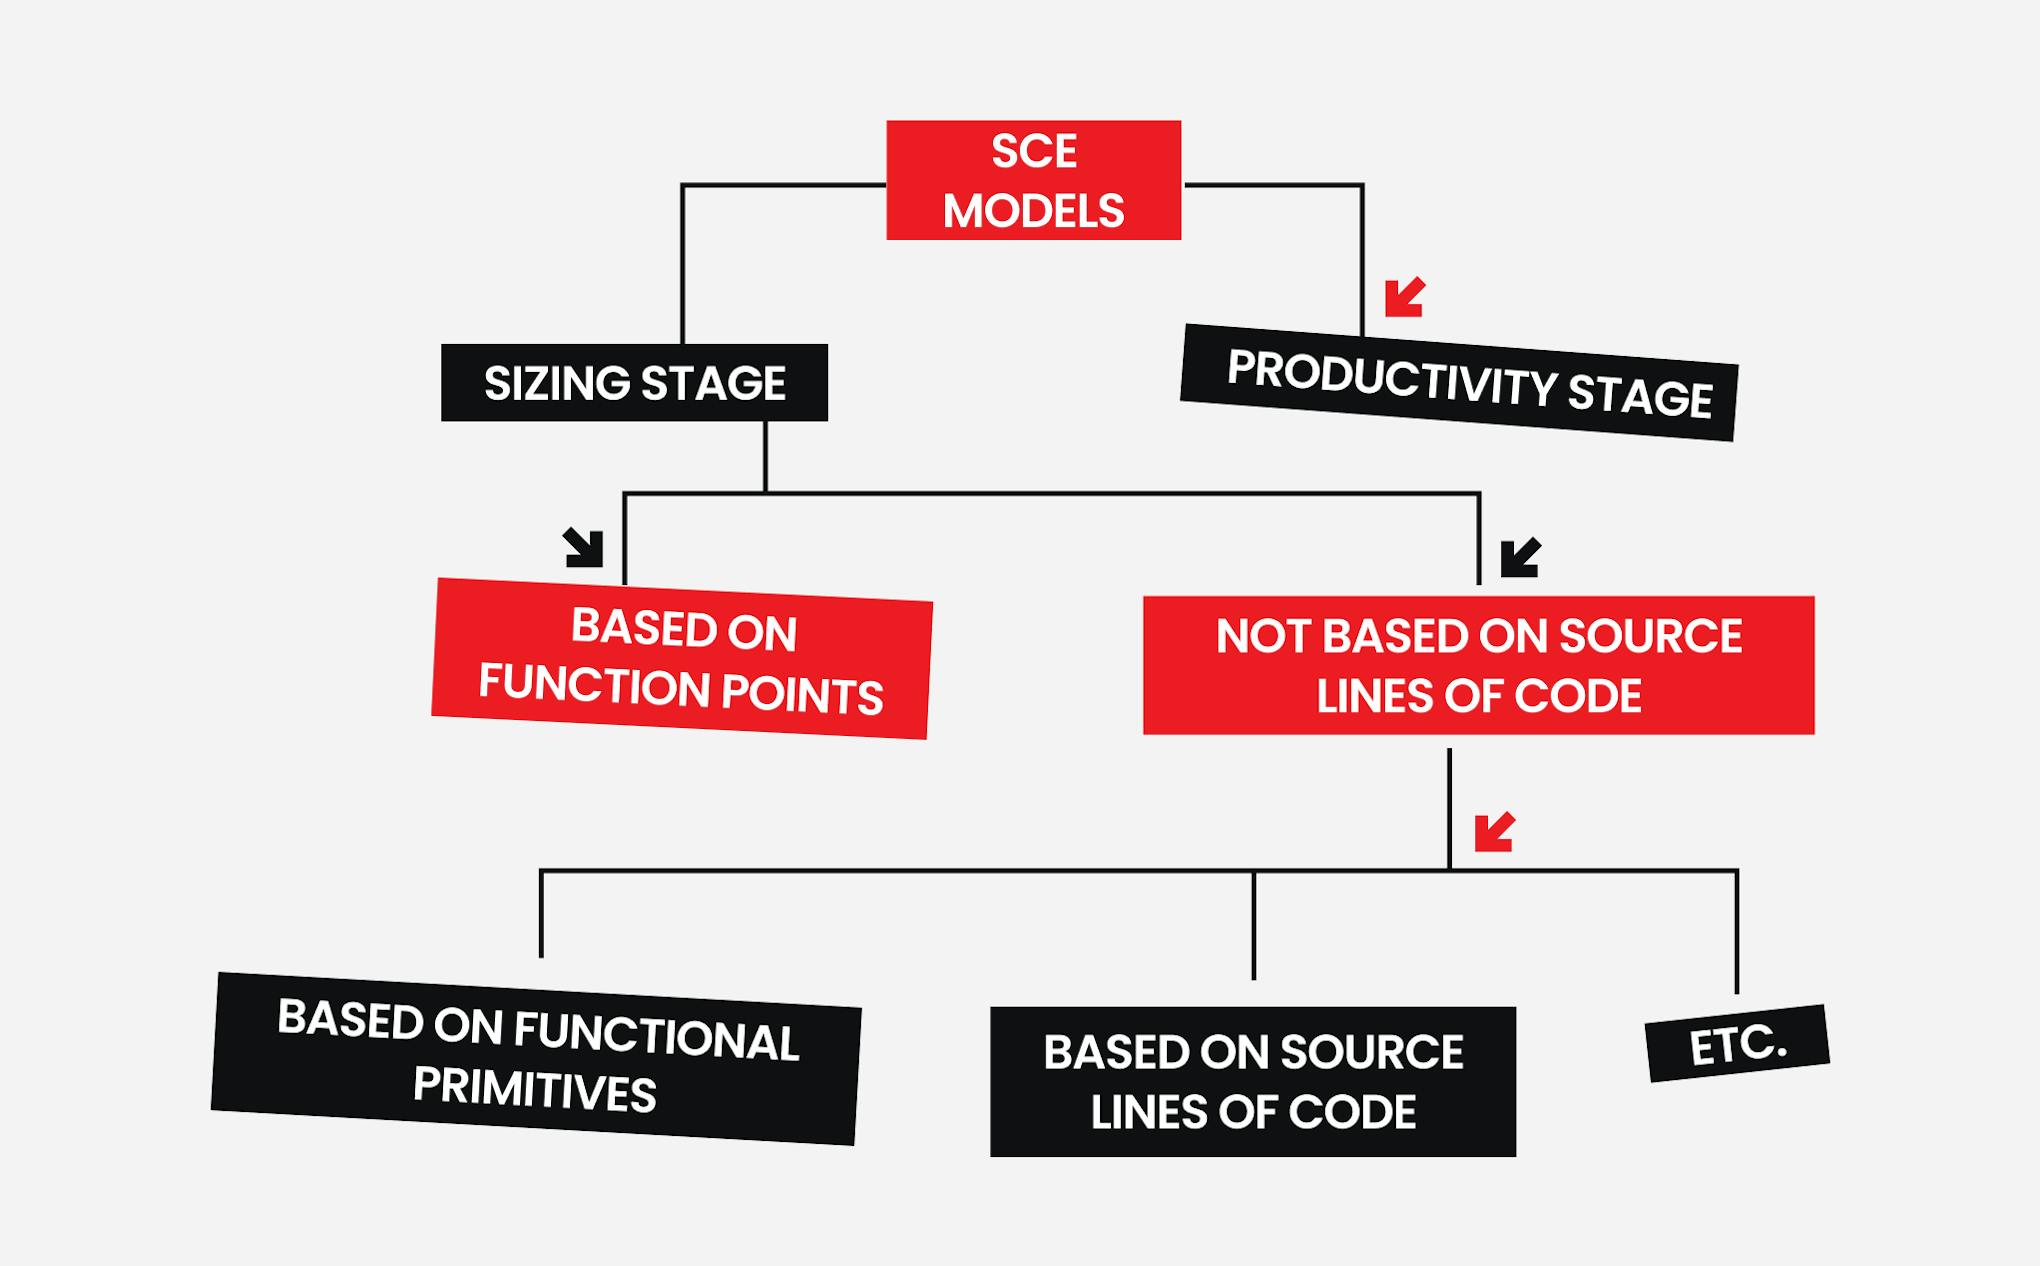 Two stages in software cost estimation models